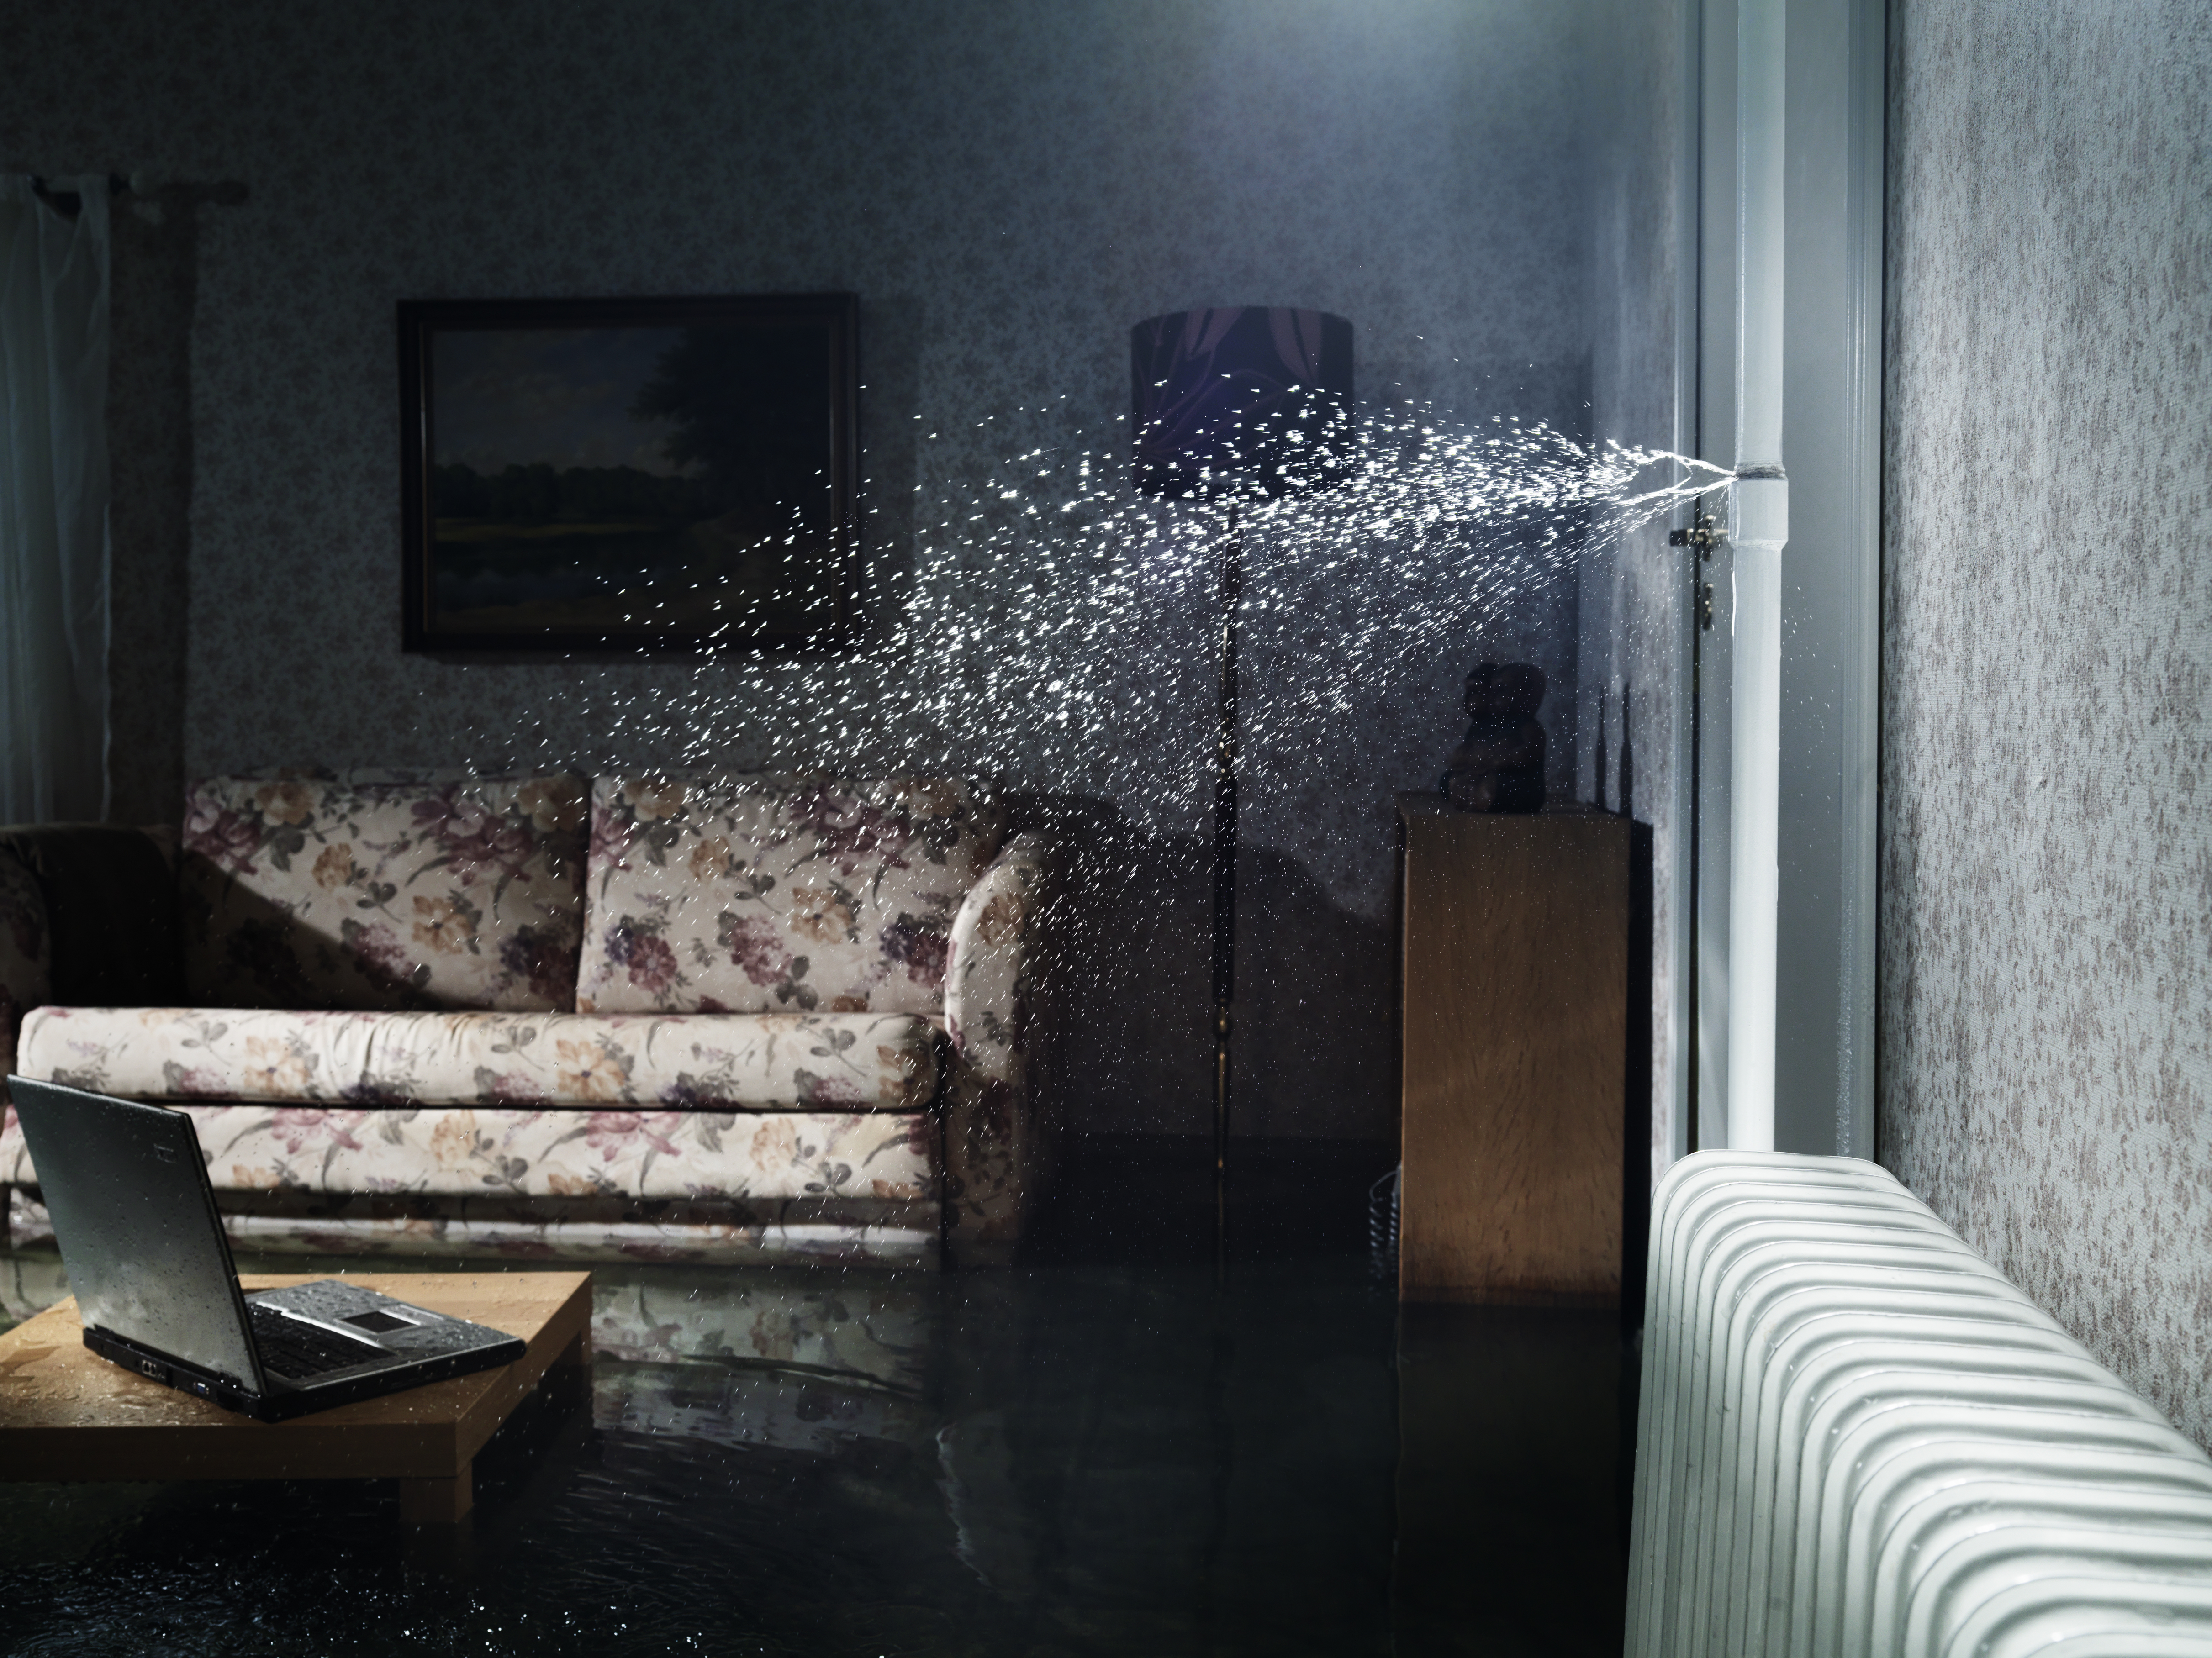 Water splashing inside a room through a broken pipe | Source: Getty Images